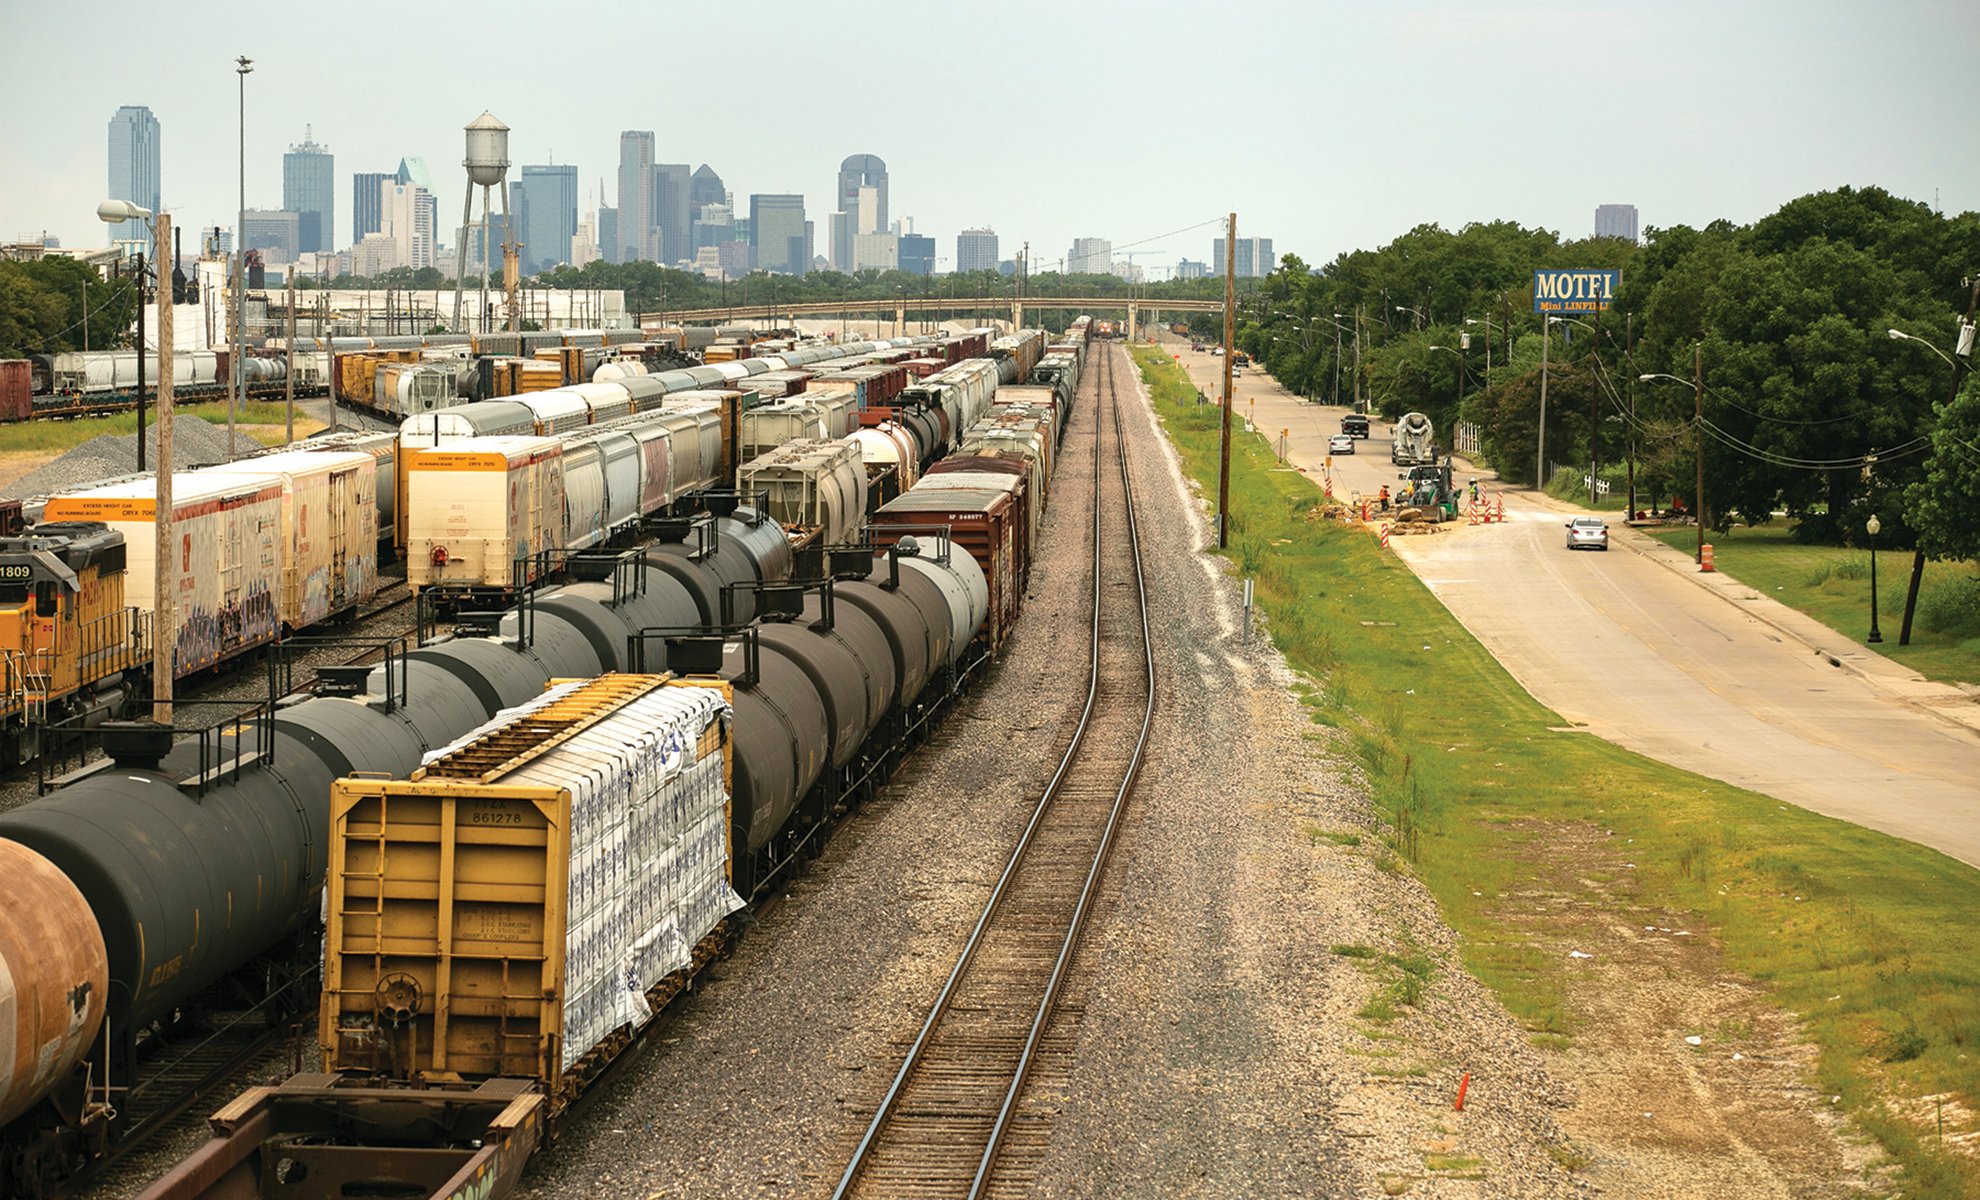 Industrial facilities, like this railyard, are heavily concentrated near communities of color south of downtown Dallas.